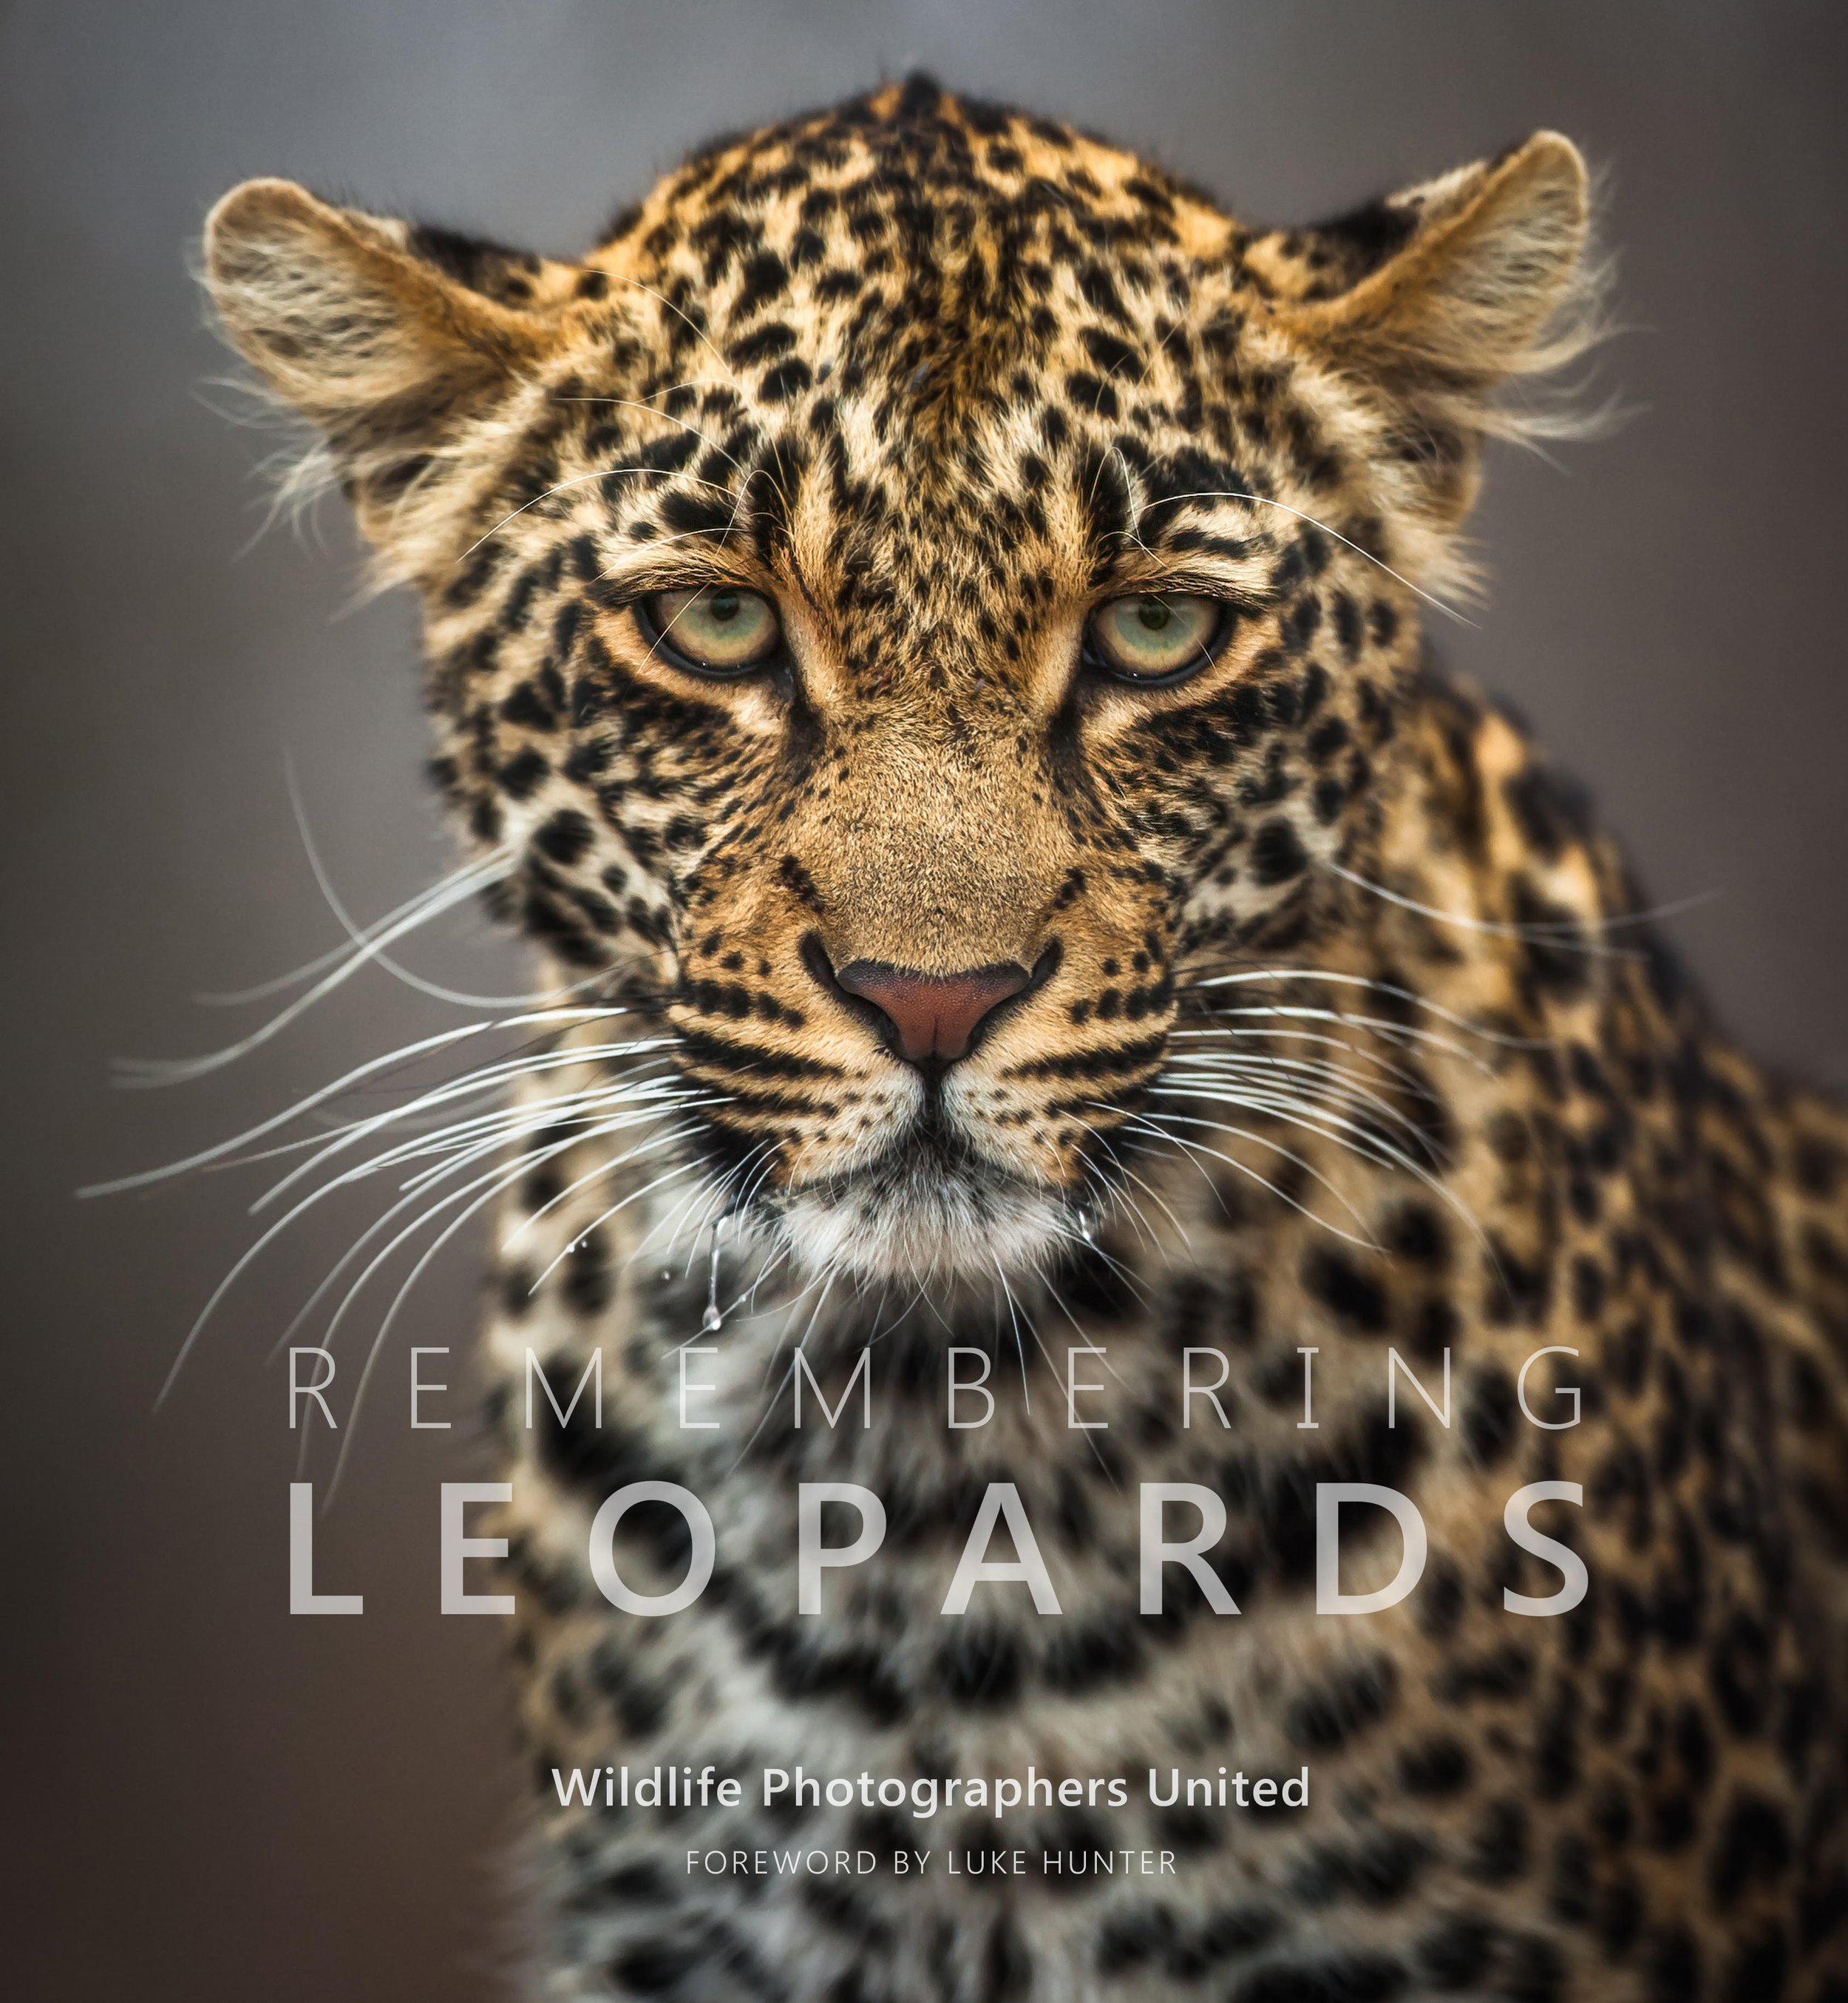 Remembering Leopards is the stunning eighth book in the Remembering Wildlife charity series. (Copy) (Copy) (Copy) (Copy) (Copy) (Copy) (Copy) (Copy) (Copy) (Copy) (Copy) (Copy) (Copy) (Copy) (Copy)